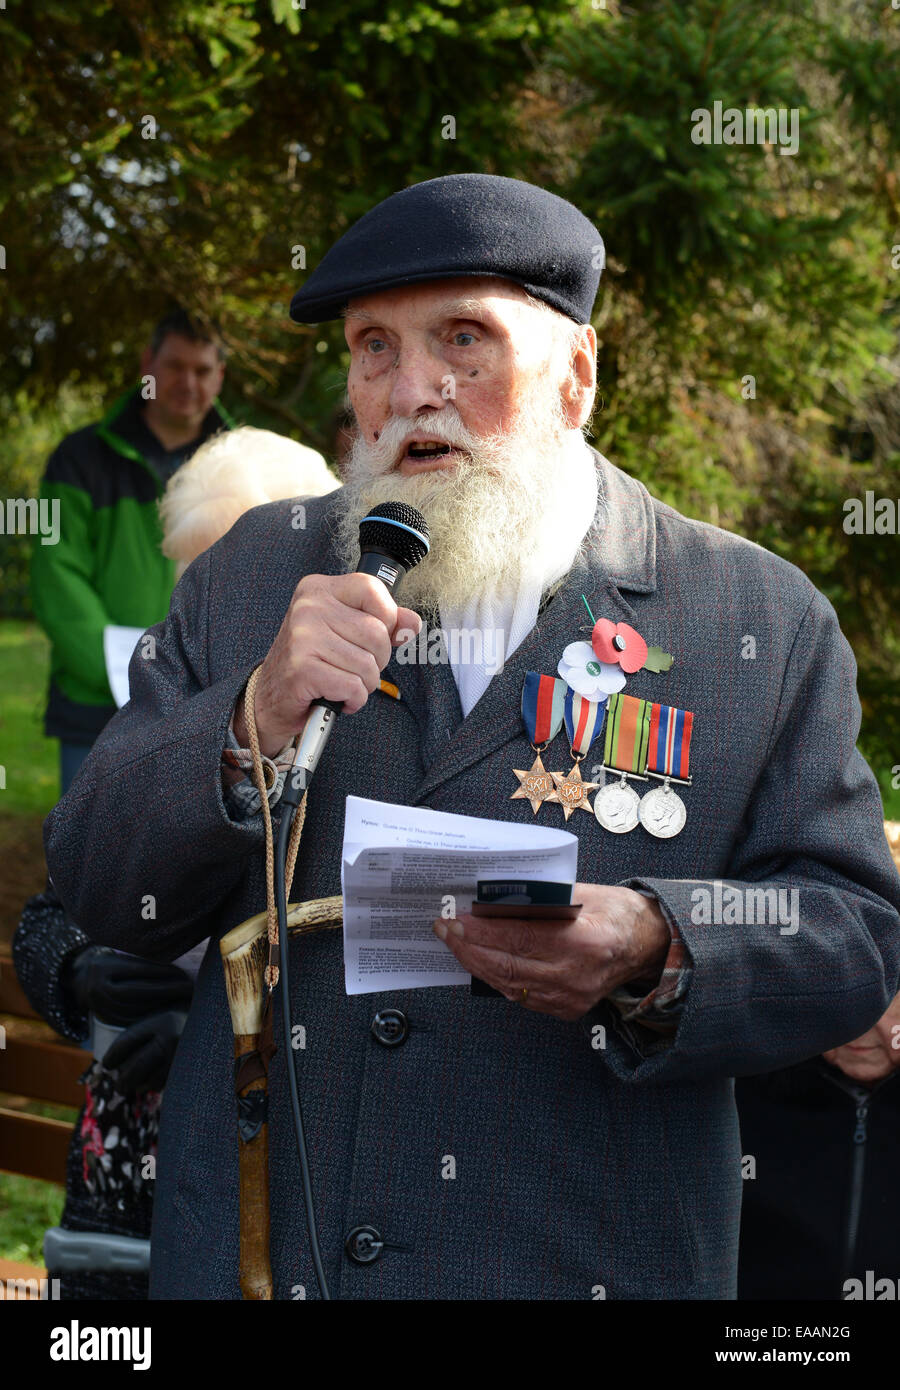 World War Two veteran George Evans aged 91 wearing red poppy and white peace poppy at Wellington Remembrance Service. Stock Photo